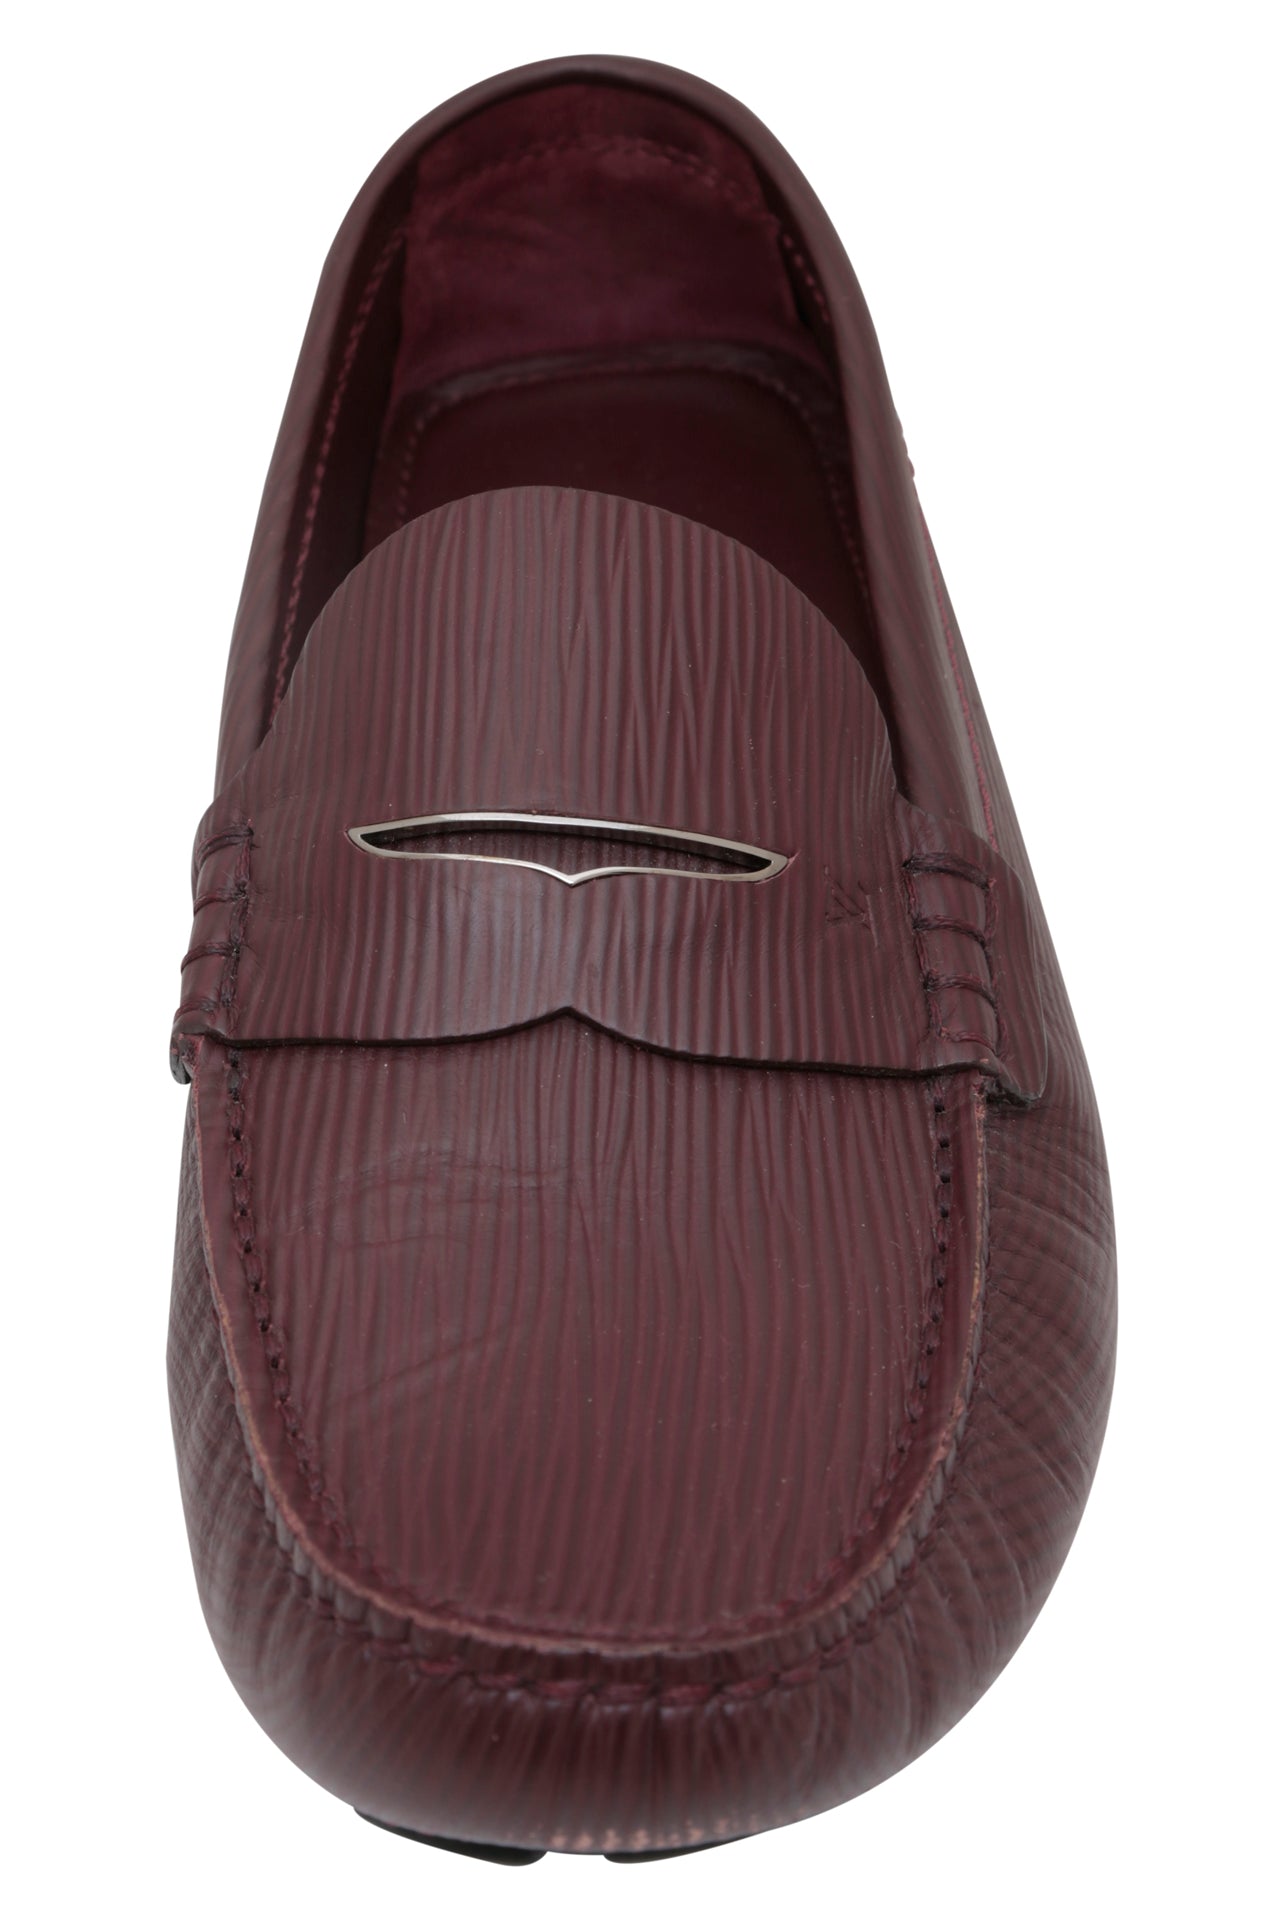 Louis Vuitton Epi Leather Penny Loafers Maroon UK 9